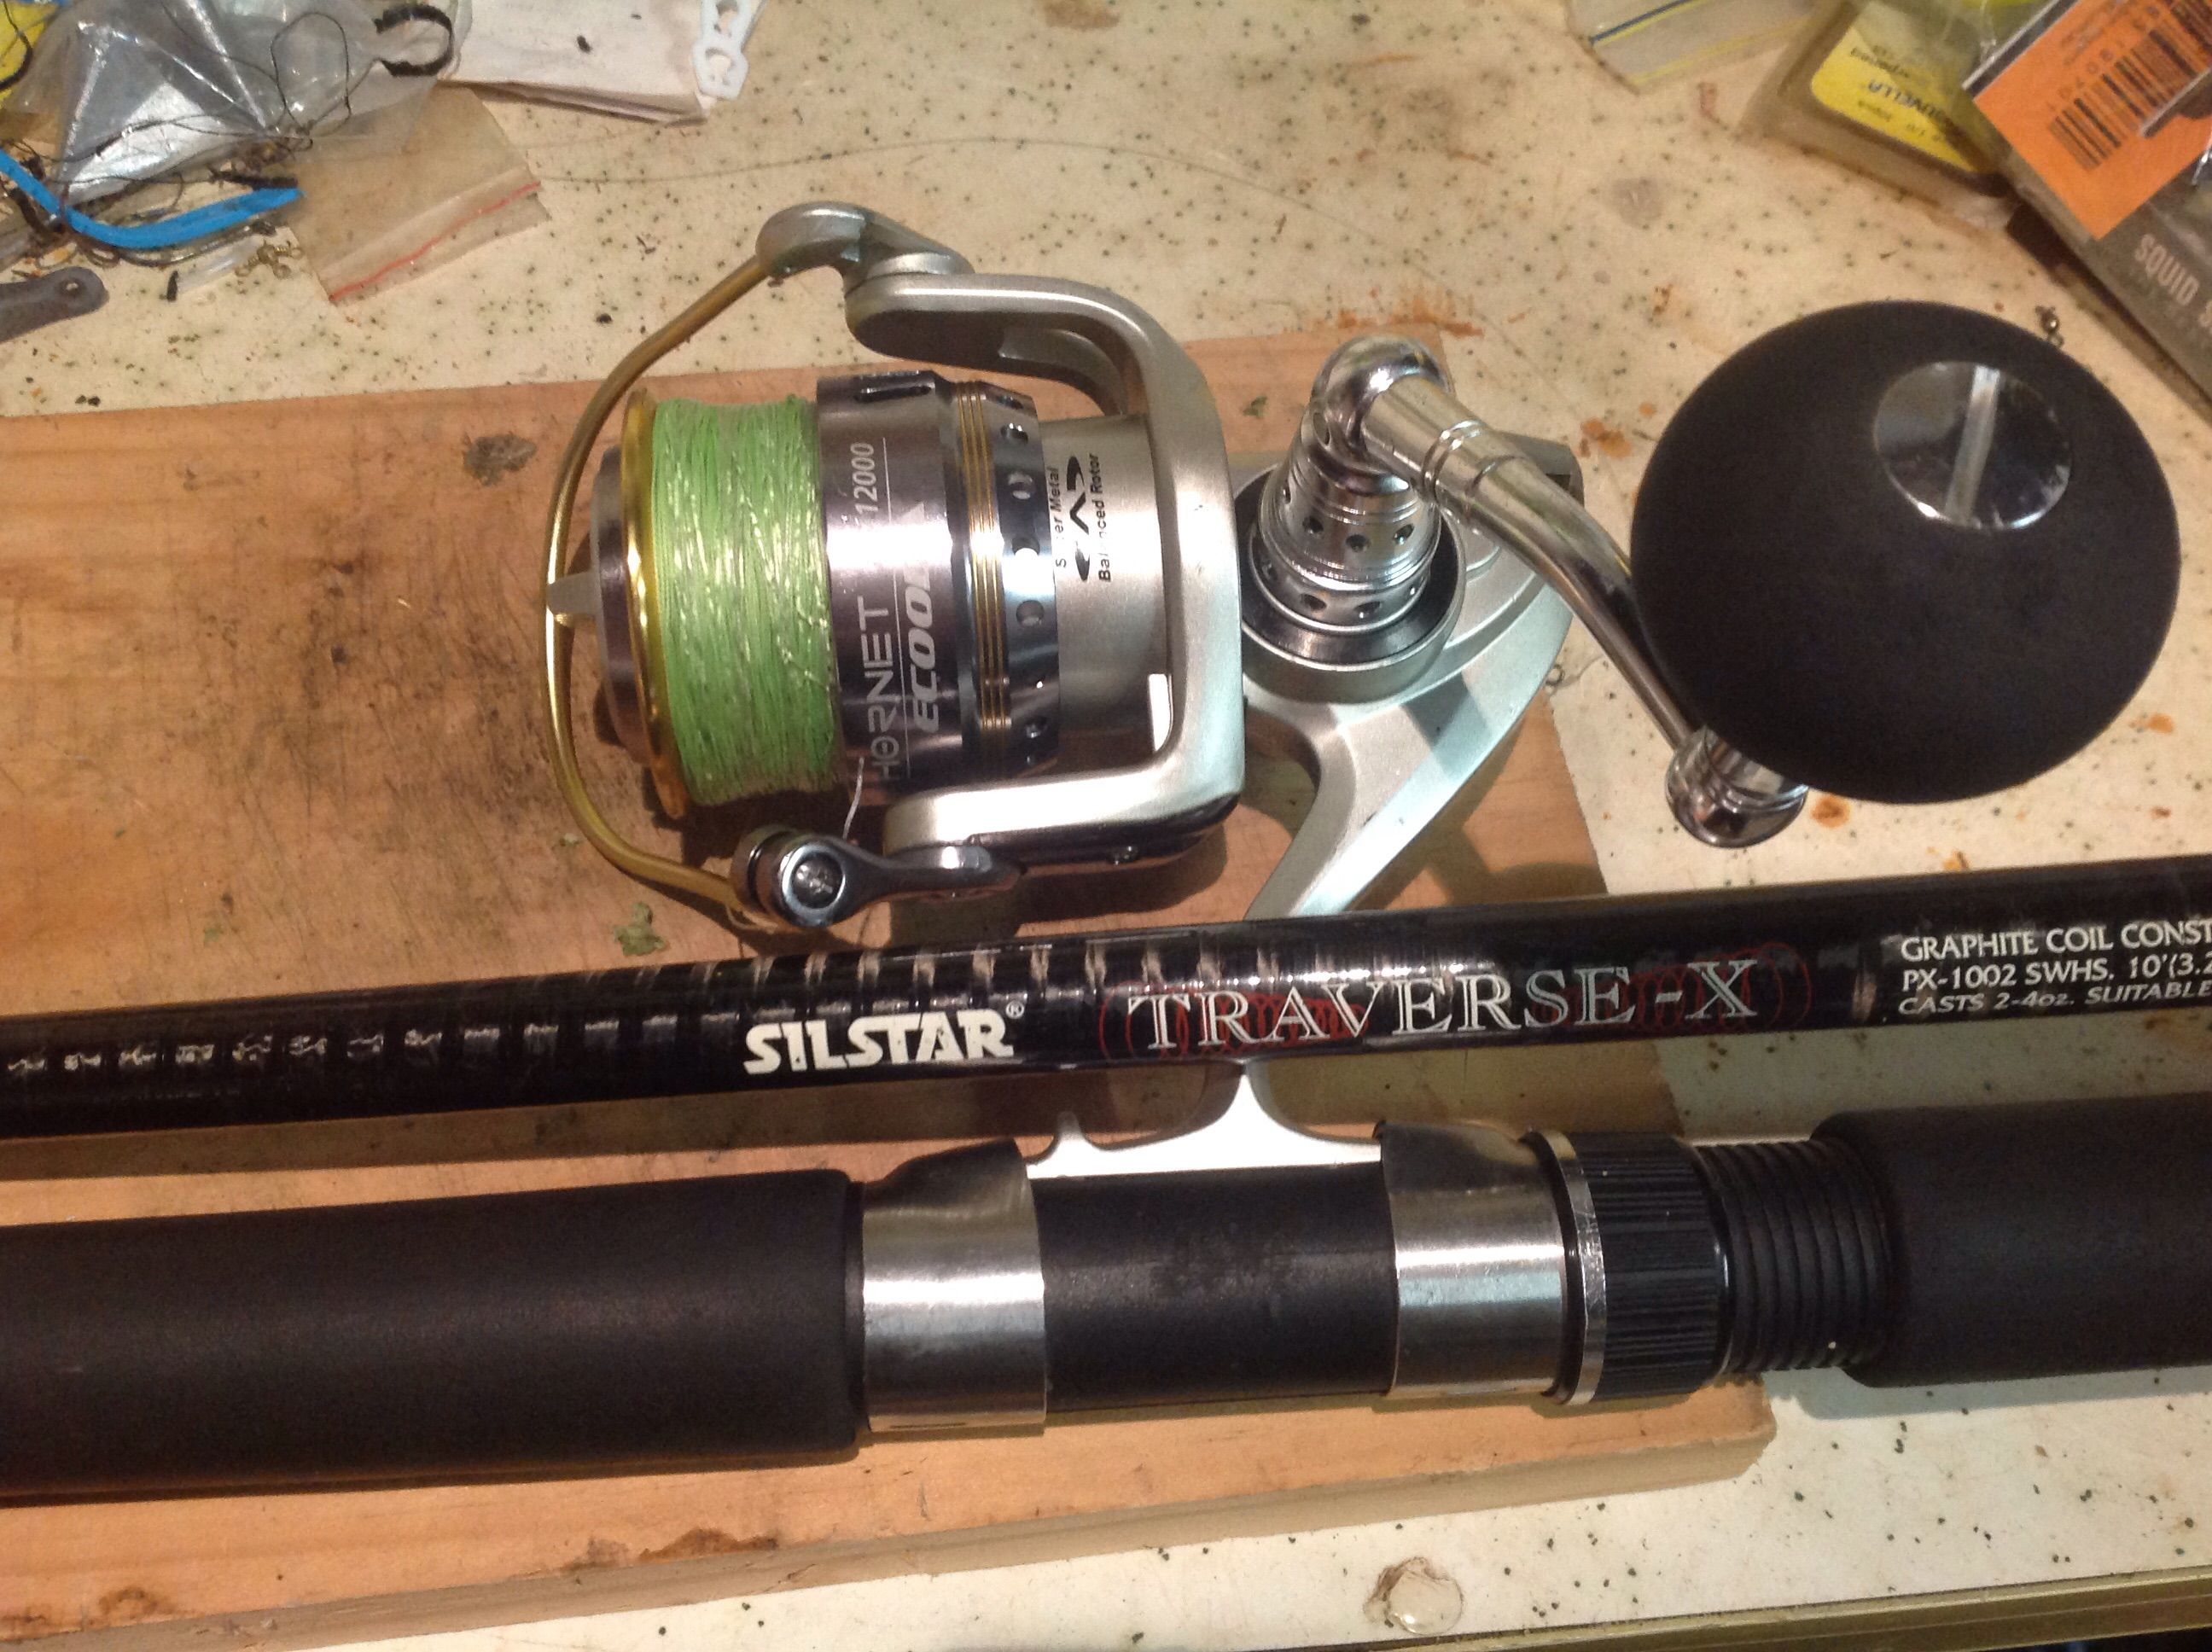 Rod/reel for spinning metals - Tackle Talk - DECKEE Community